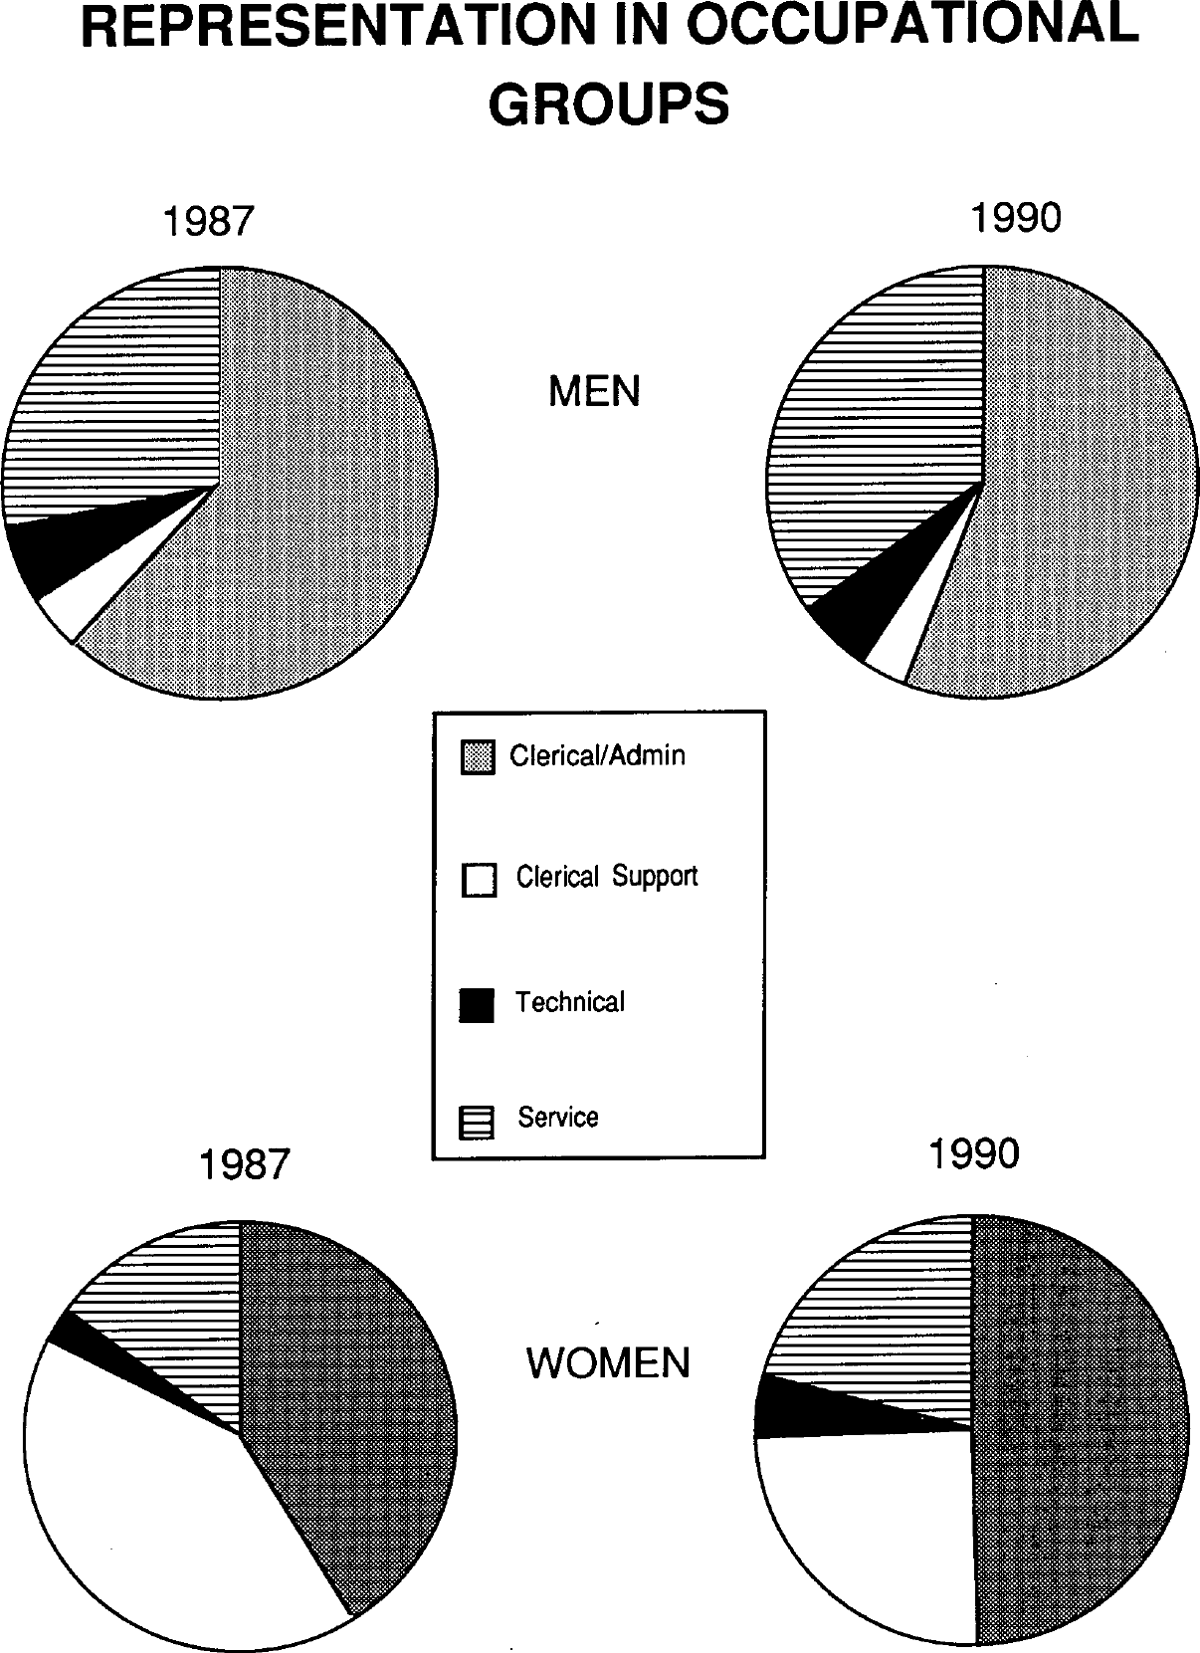 Graph Showing Representation in Occupational Groups